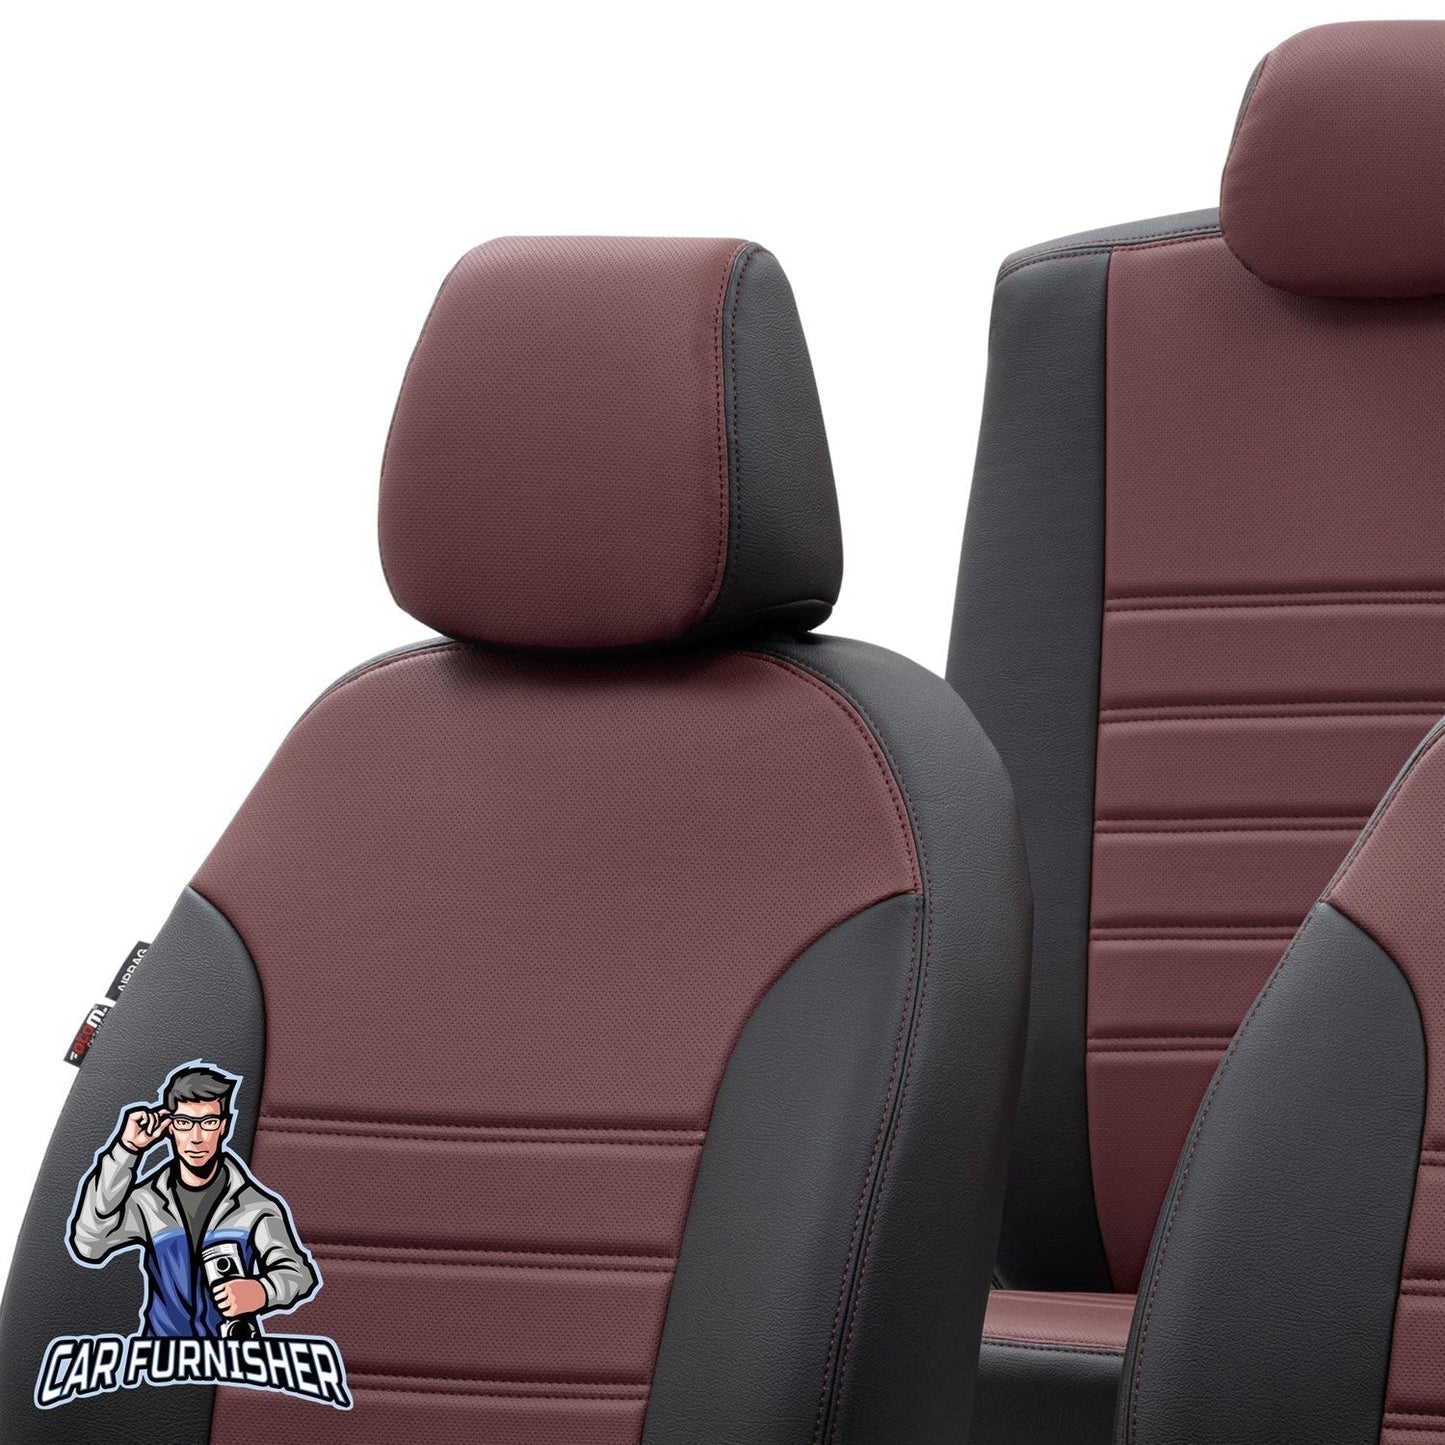 Ford Galaxy Seat Covers Istanbul Leather Design Burgundy Leather